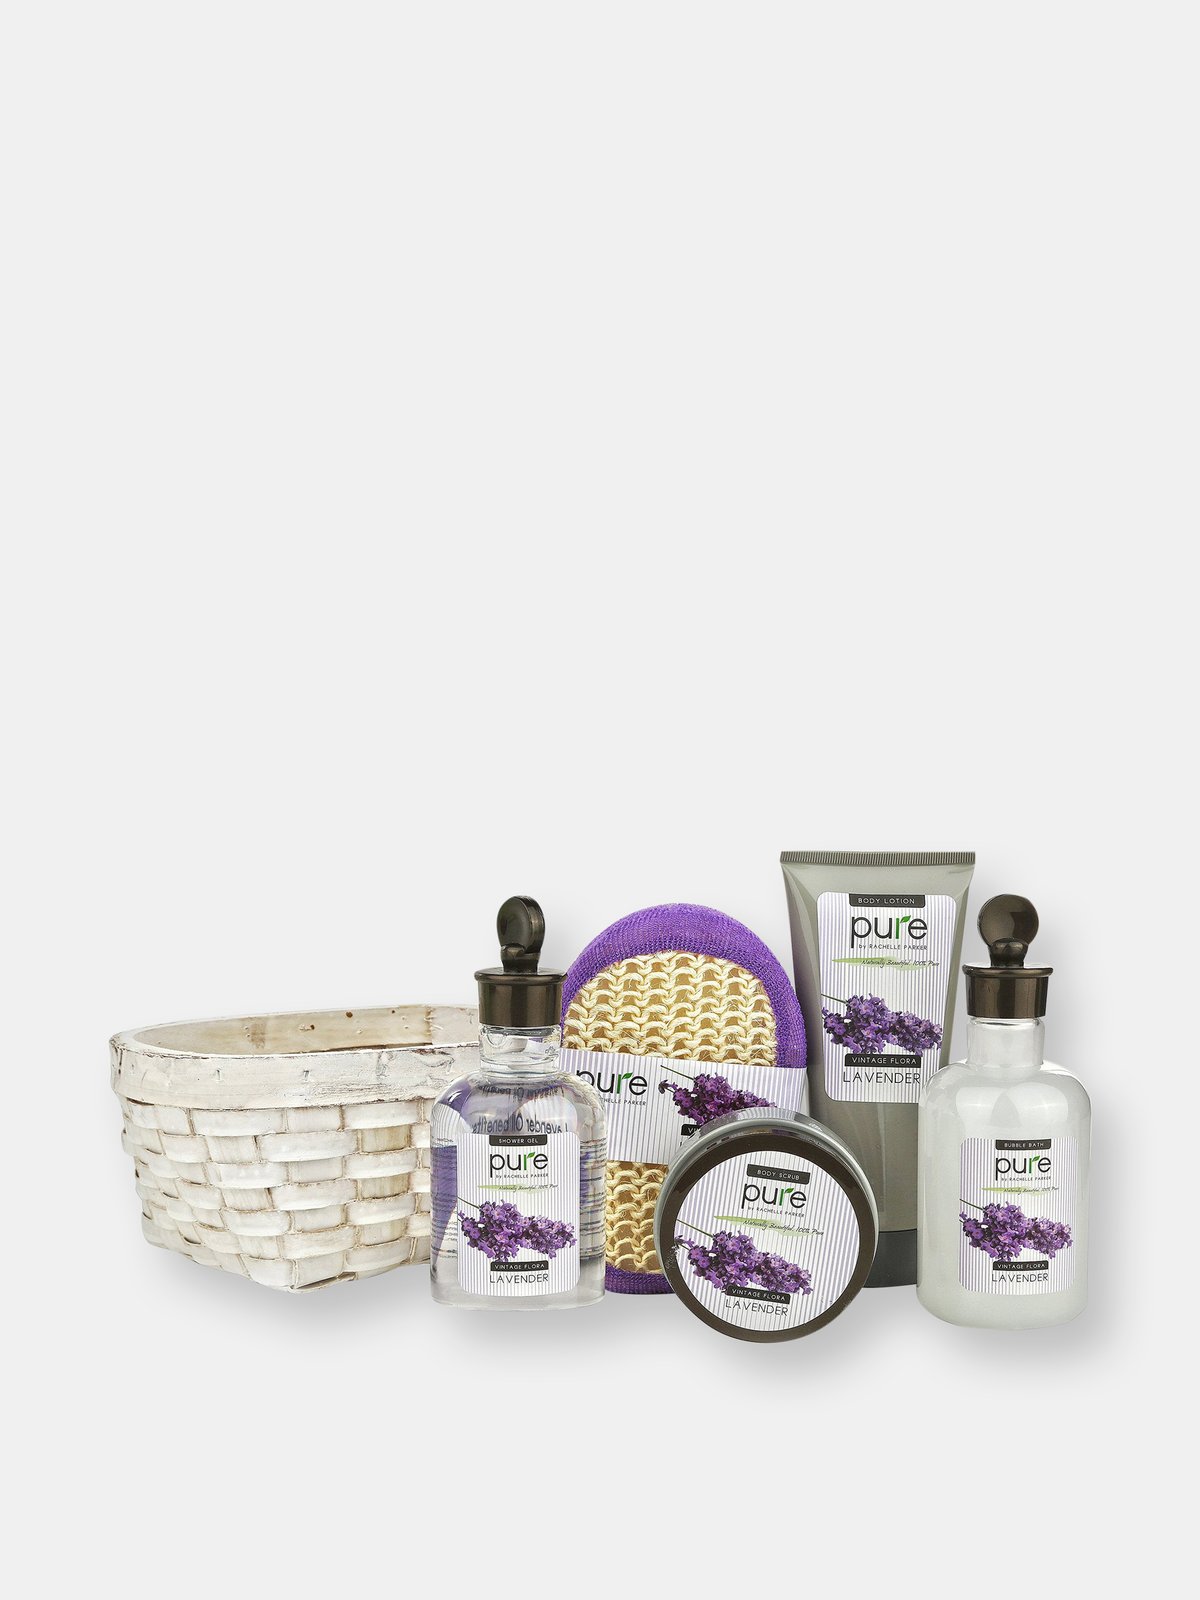 Spa Gifts for Women - Relaxing Self Care Gifts for Women - Bath and Body  Gift Baskets for Women - Birthday Care Package for Women - Get Well Soon